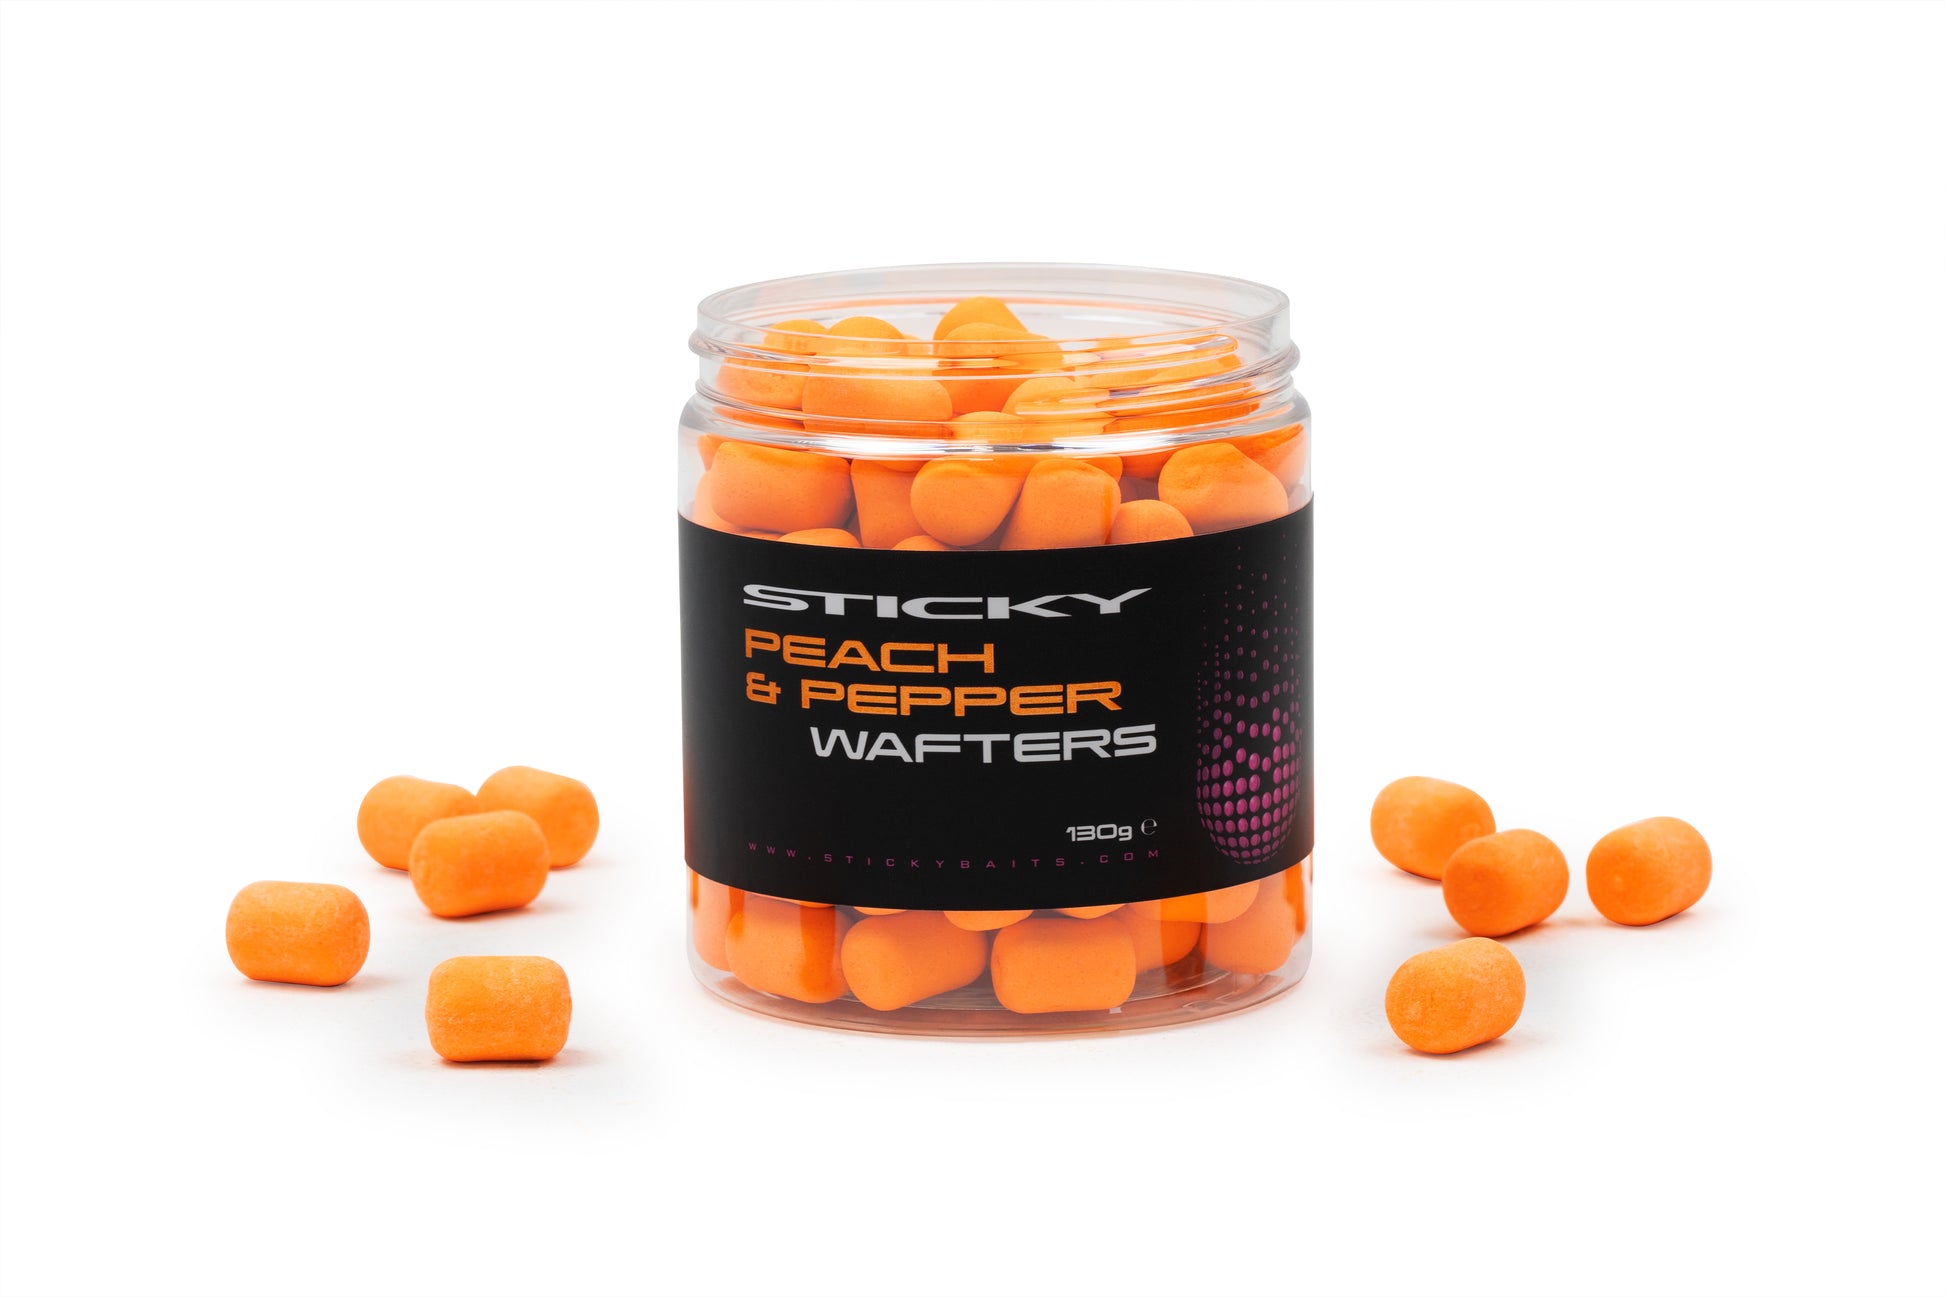 STICKY BAITS STICKY BAITS Peach & Pepper Wafters 130g Pot  - Parkfield Angling Centre